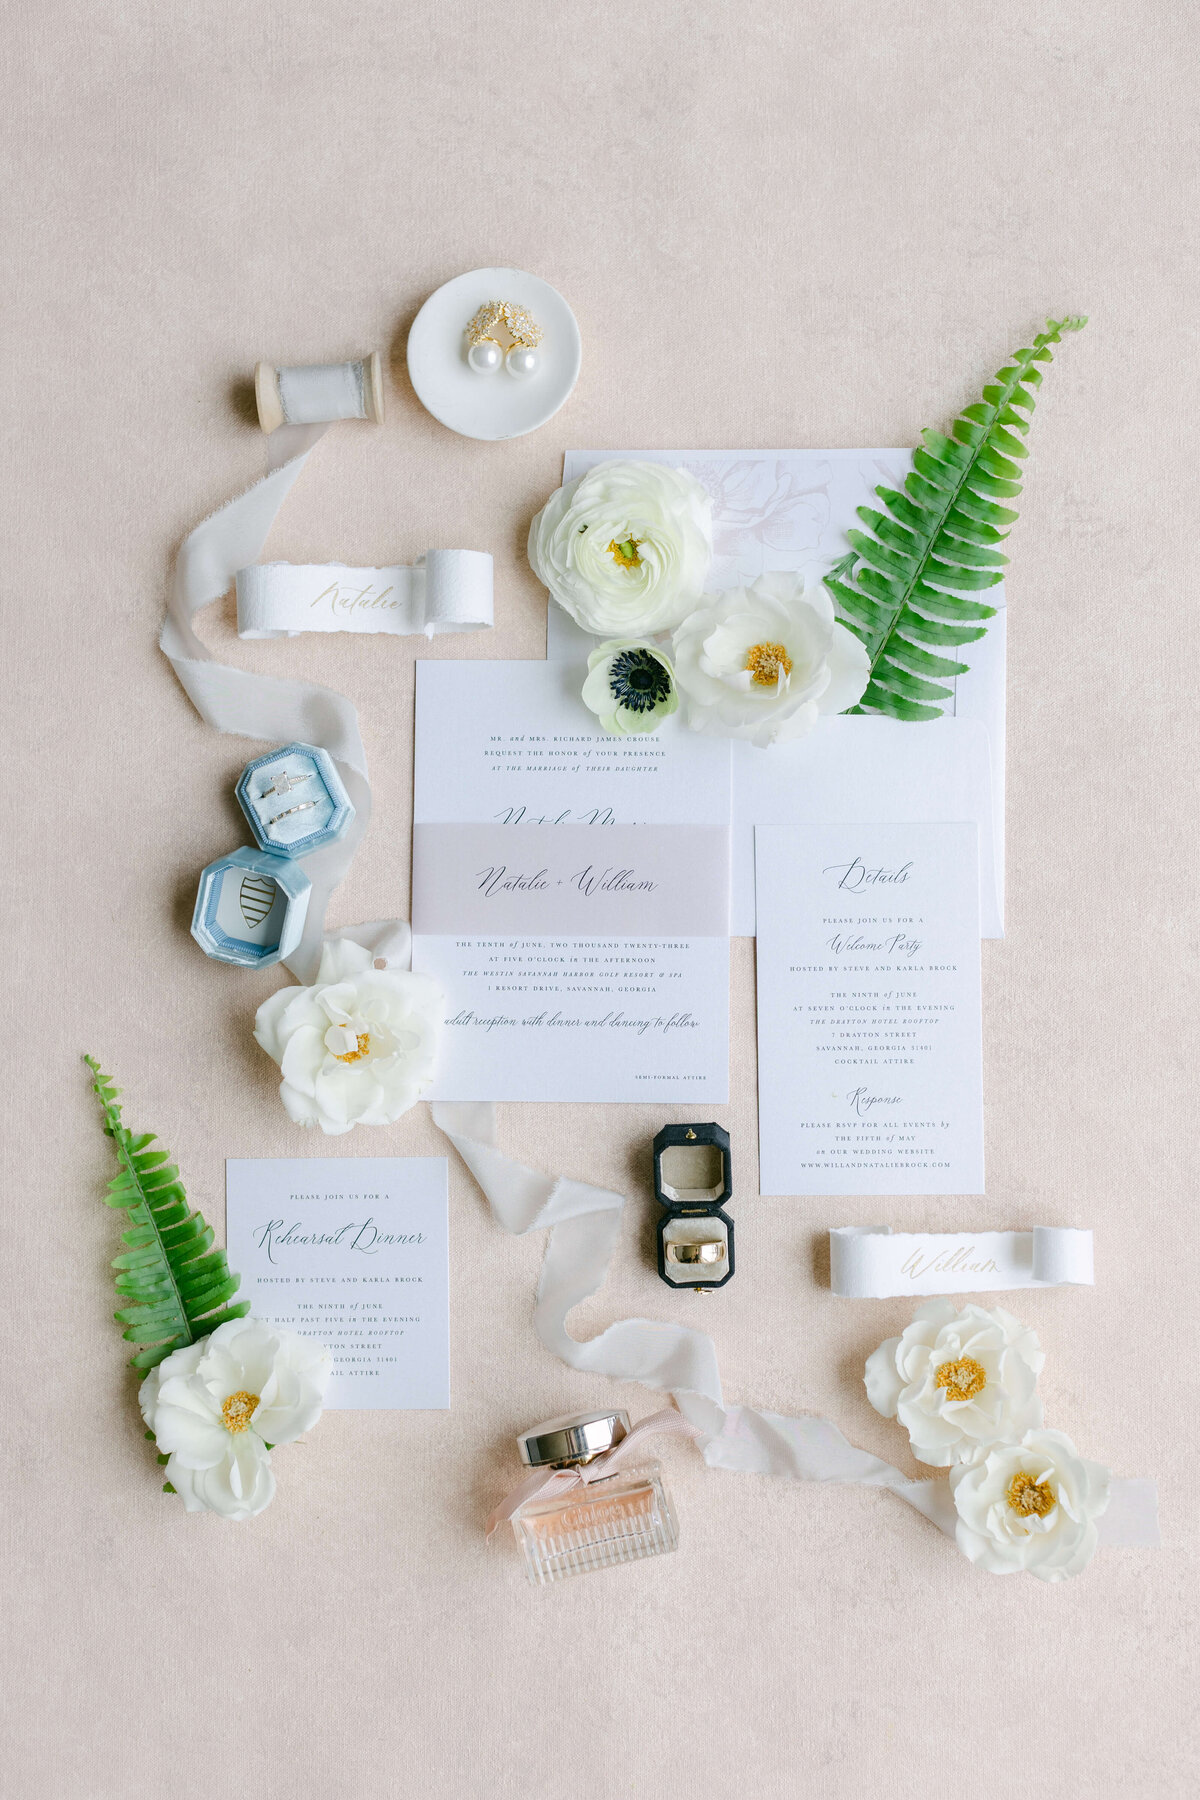 Invitations and rings sit on a white background.